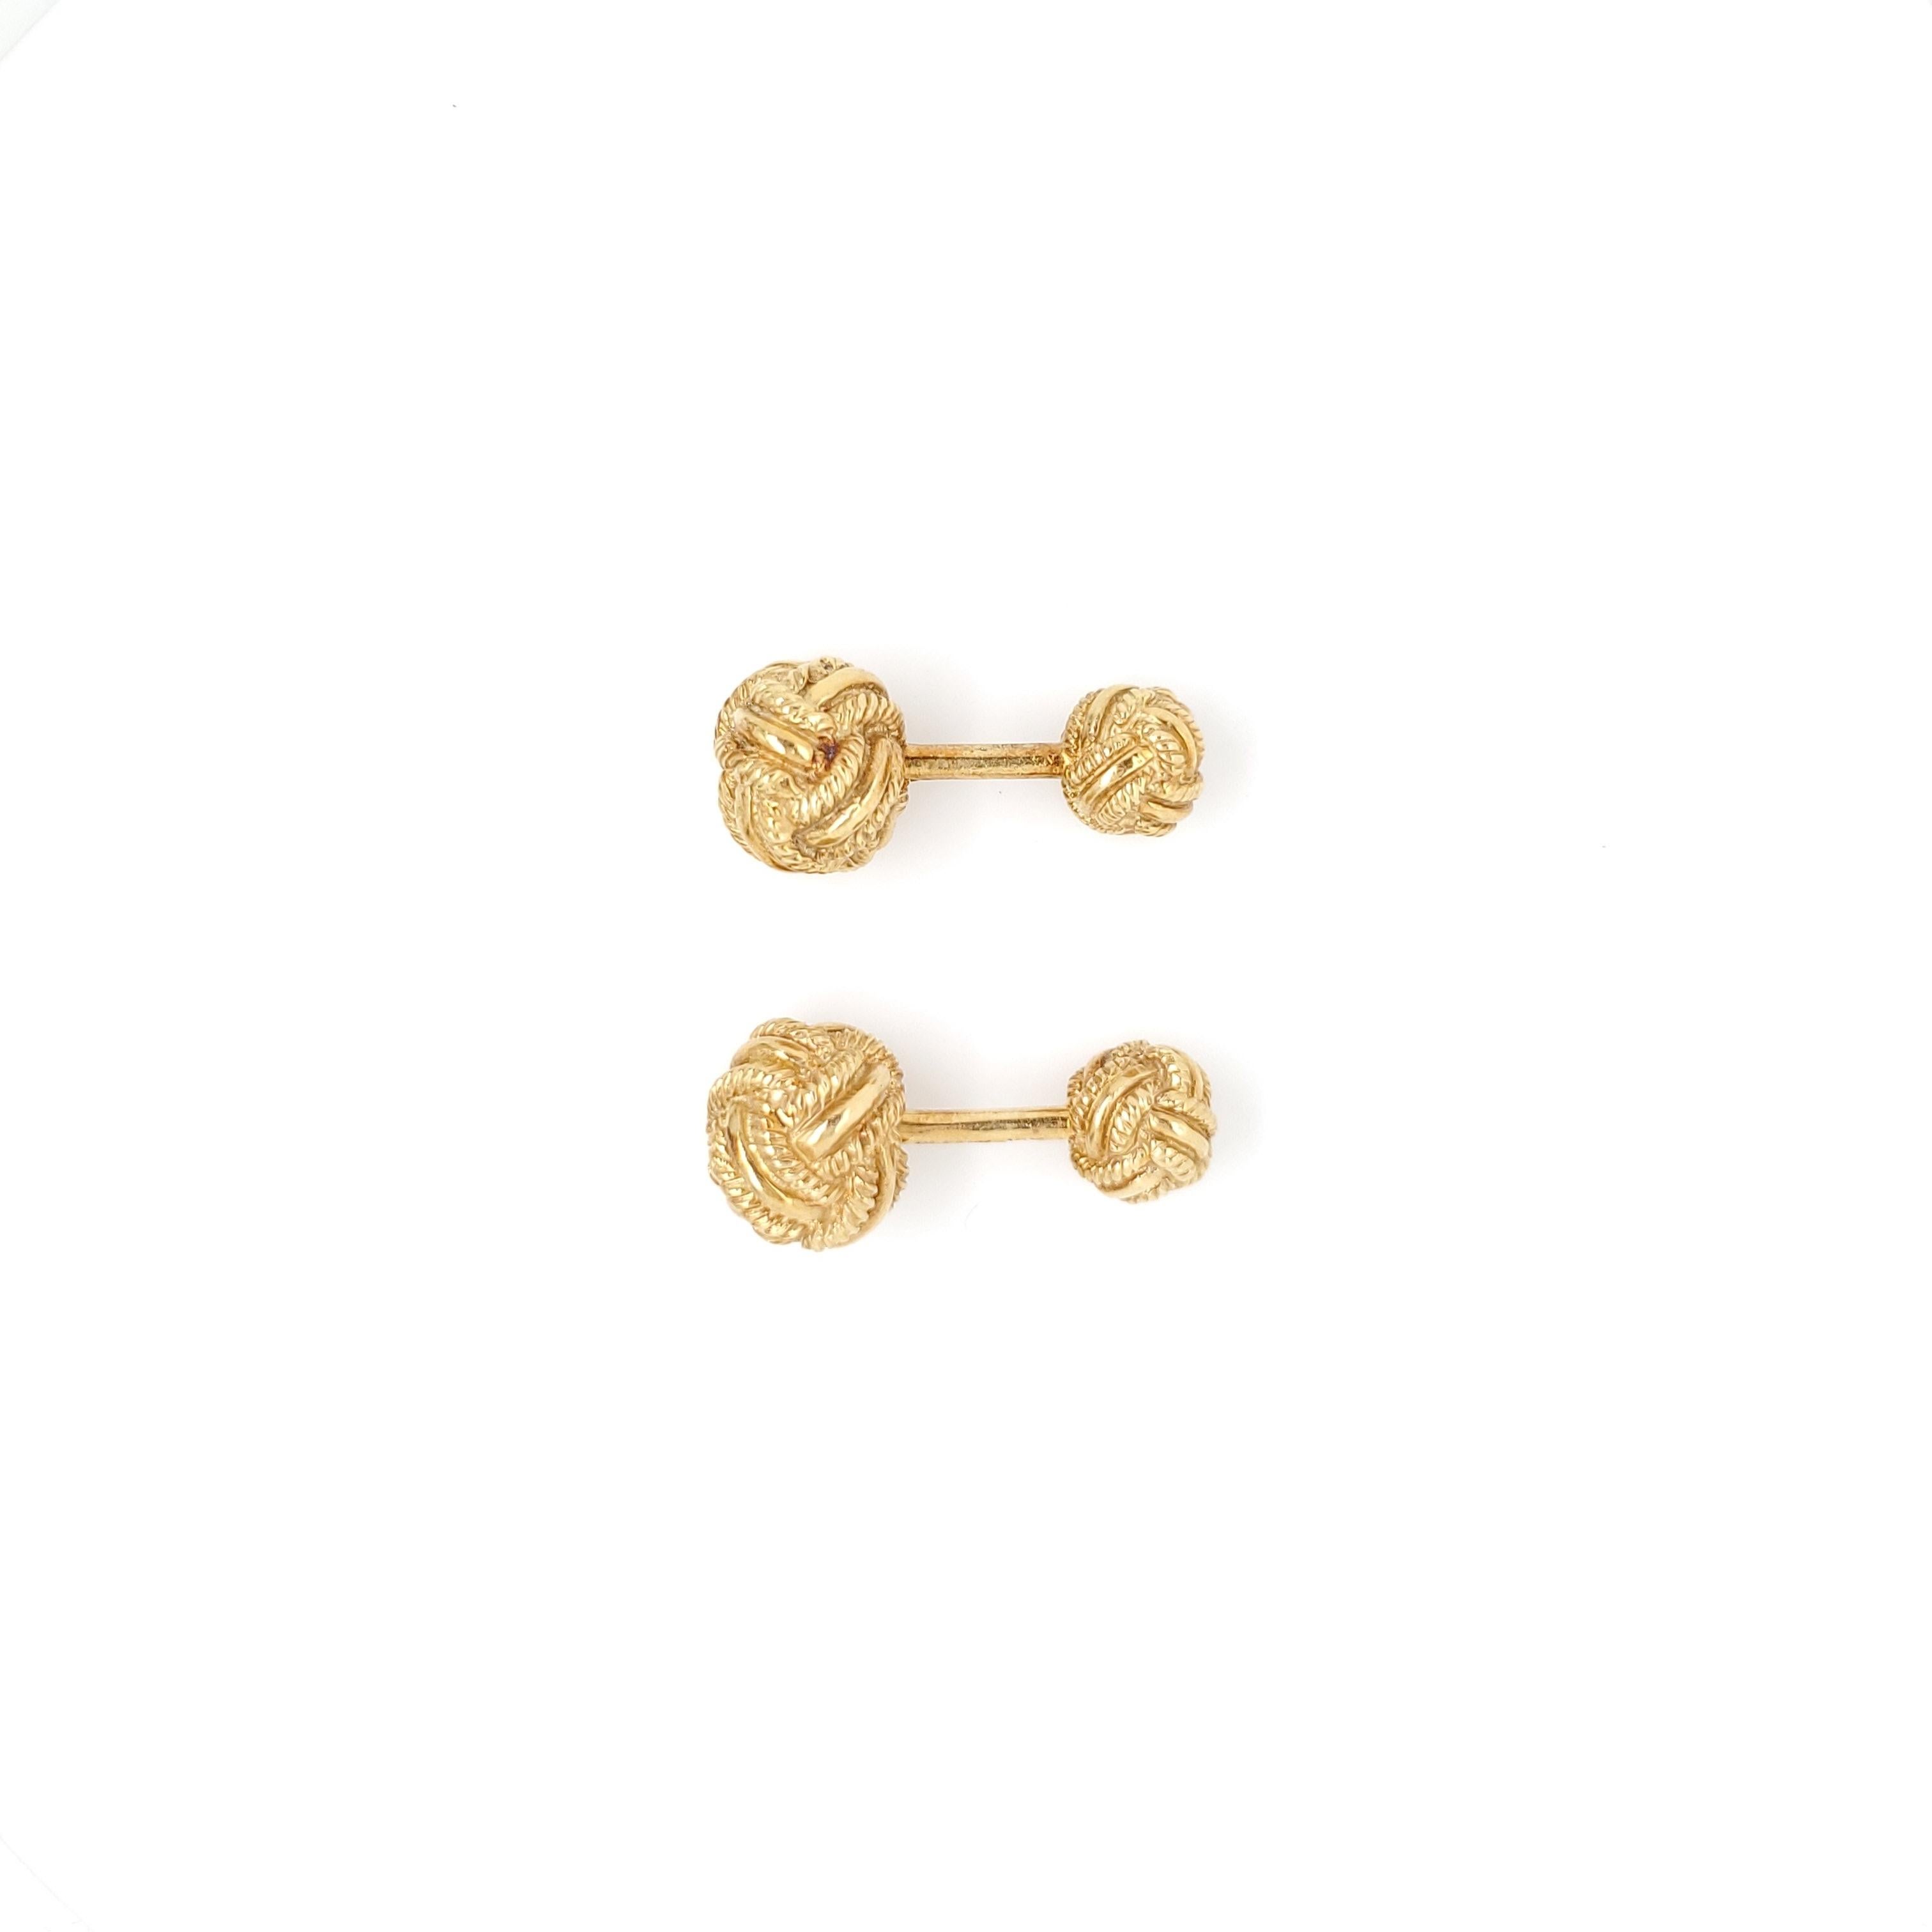 A pair of 18 karat yellow gold woven knot cufflinks made by Jean Schlumberger for Tiffany & Co. The larger knot measures 11mm in diameter and the smaller knot at 8mm. Each cufflink measures 25mm in length. Both are signed Tiffany, 18 and